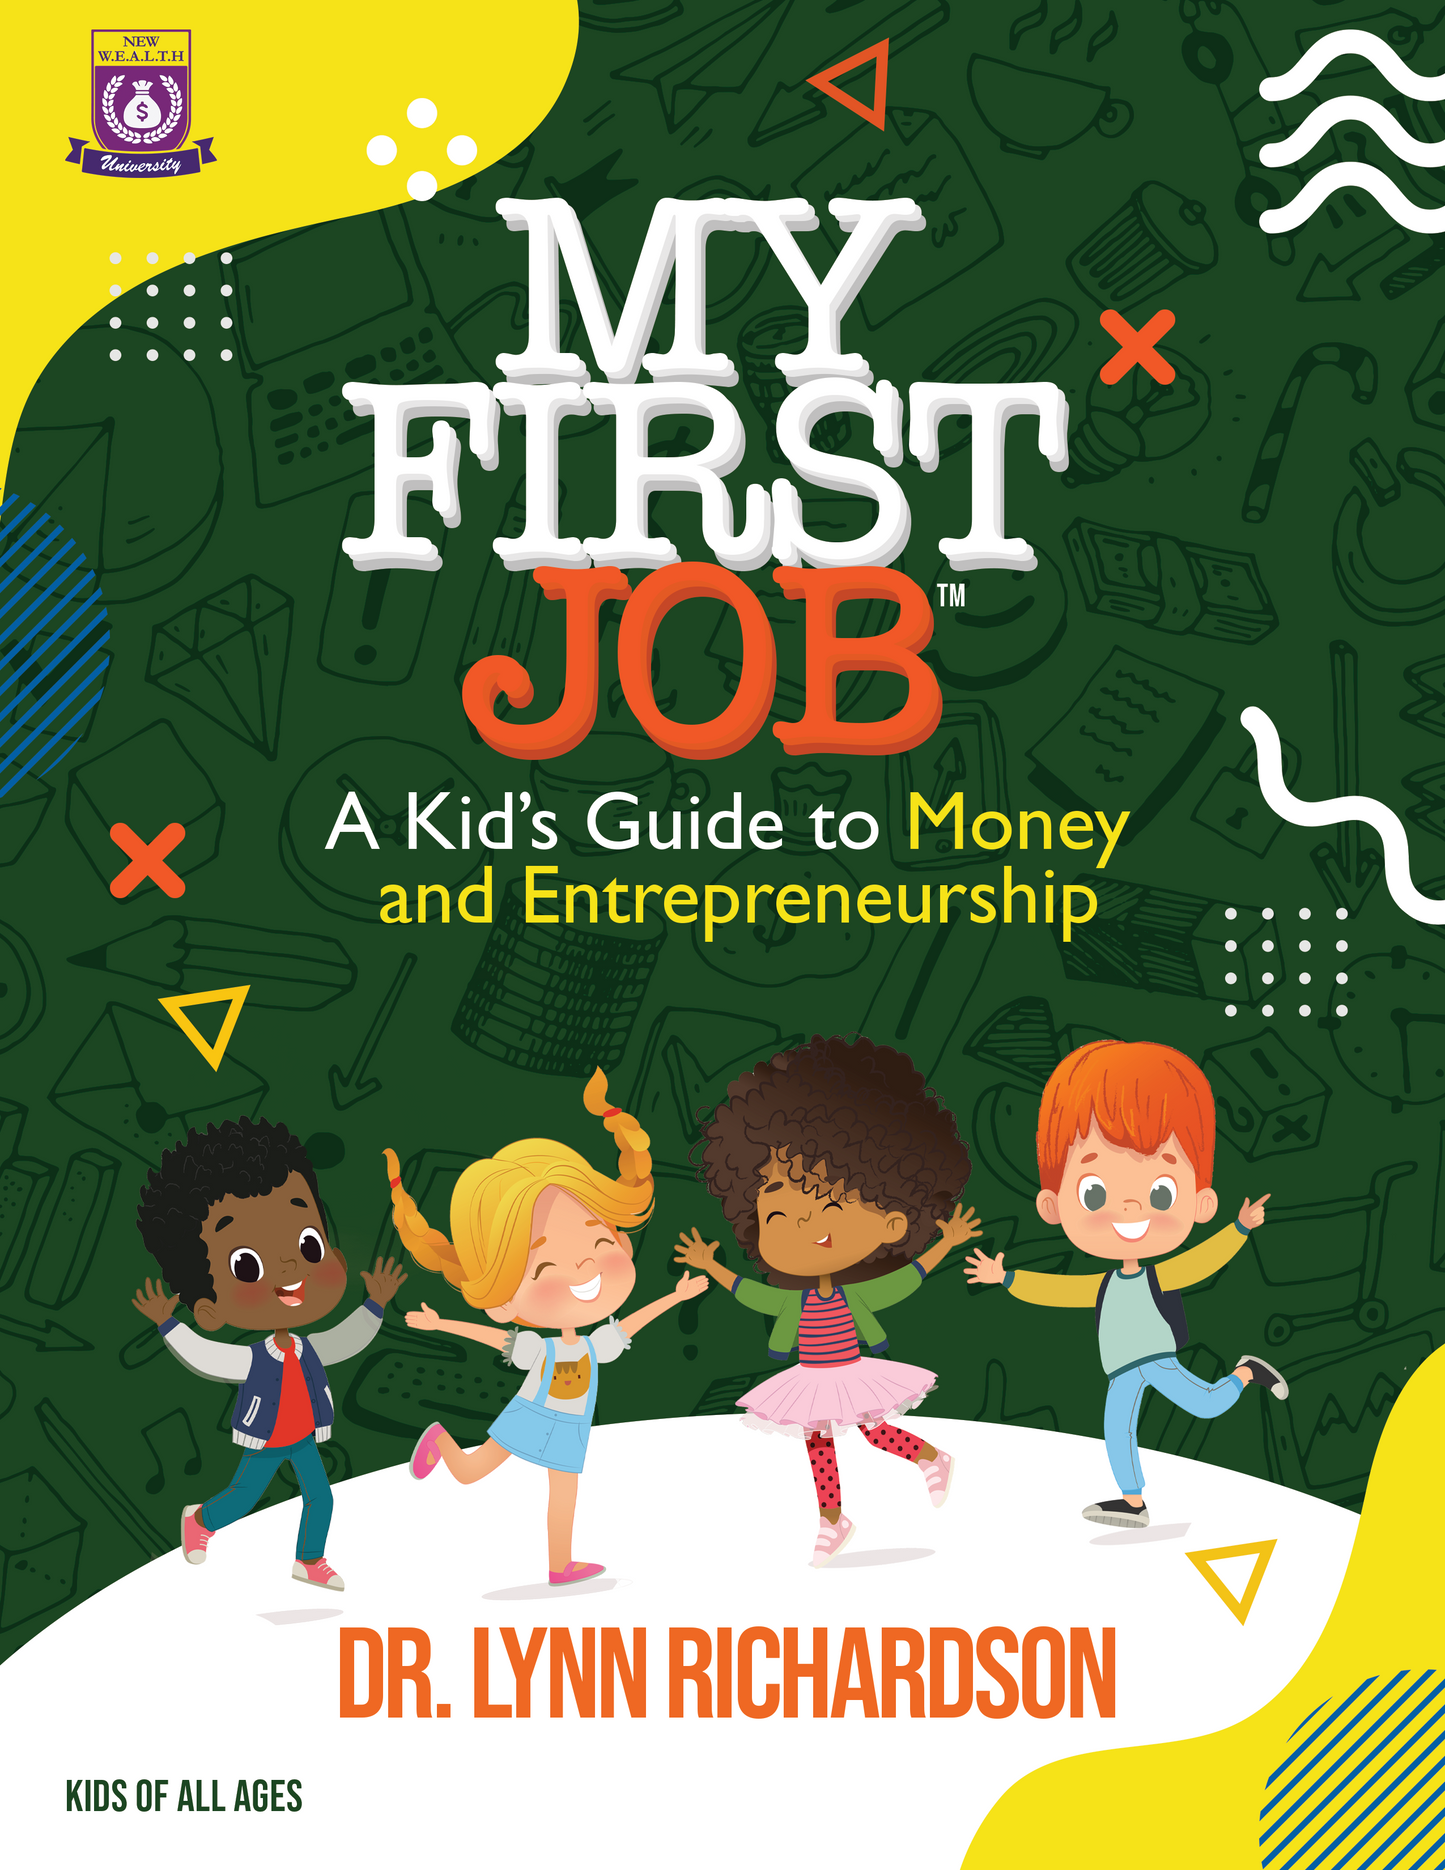 My First Job: A Kid's Guide to Money and Entrepreneurship